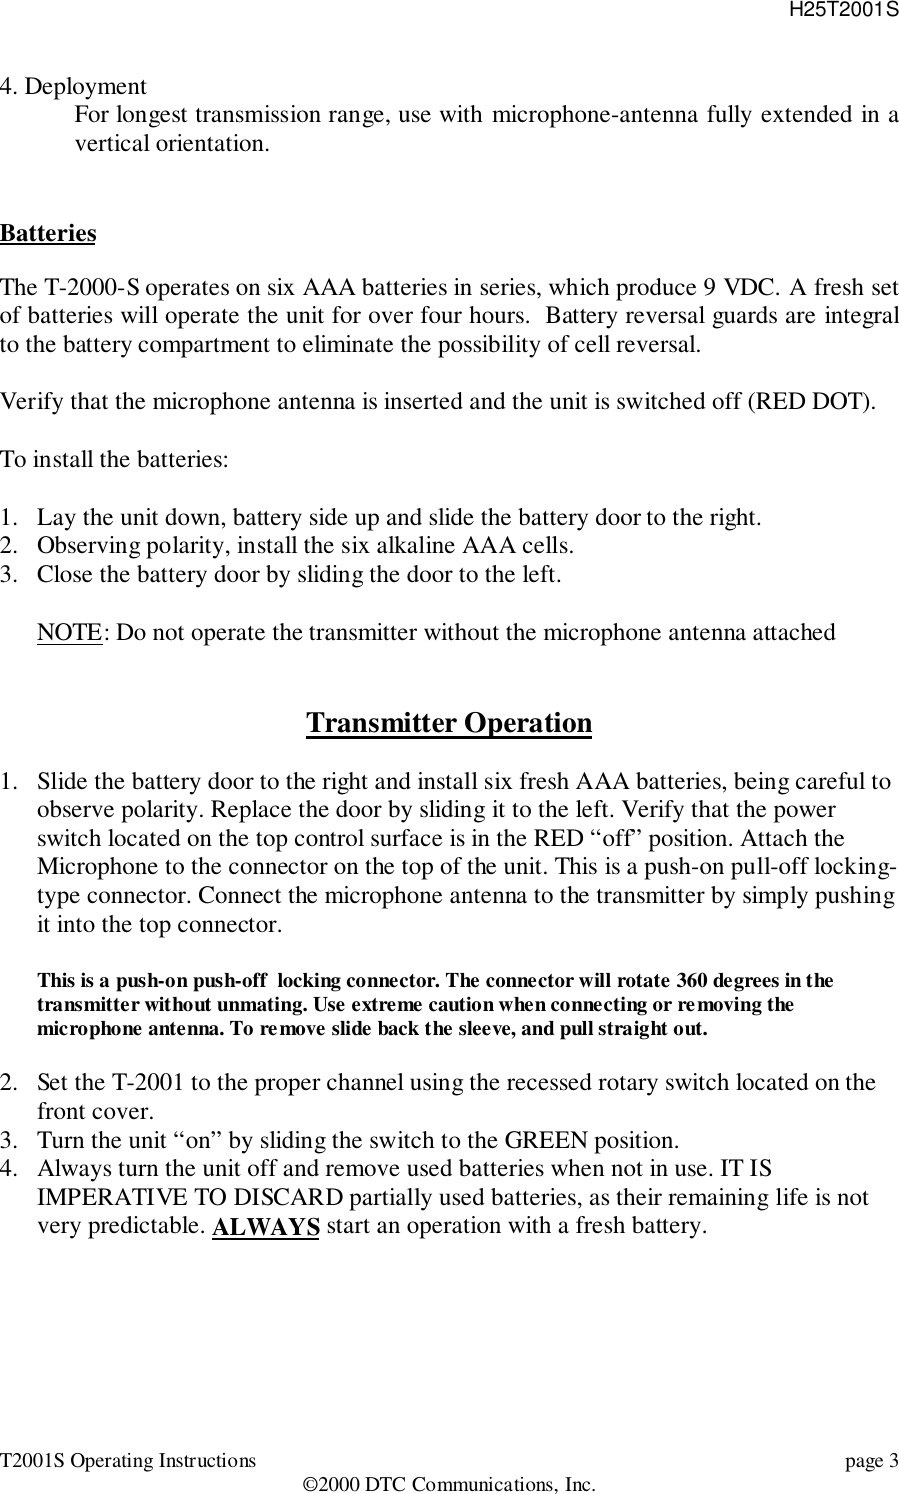 H25T2001ST2001S Operating Instructions page 3©2000 DTC Communications, Inc.4. DeploymentFor longest transmission range, use with microphone-antenna fully extended in avertical orientation.BatteriesThe T-2000-S operates on six AAA batteries in series, which produce 9 VDC. A fresh setof batteries will operate the unit for over four hours.  Battery reversal guards are integralto the battery compartment to eliminate the possibility of cell reversal.Verify that the microphone antenna is inserted and the unit is switched off (RED DOT).To install the batteries:1. Lay the unit down, battery side up and slide the battery door to the right.2. Observing polarity, install the six alkaline AAA cells.3. Close the battery door by sliding the door to the left.NOTE: Do not operate the transmitter without the microphone antenna attachedTransmitter Operation1. Slide the battery door to the right and install six fresh AAA batteries, being careful toobserve polarity. Replace the door by sliding it to the left. Verify that the powerswitch located on the top control surface is in the RED “off” position. Attach theMicrophone to the connector on the top of the unit. This is a push-on pull-off locking-type connector. Connect the microphone antenna to the transmitter by simply pushingit into the top connector.This is a push-on push-off  locking connector. The connector will rotate 360 degrees in thetransmitter without unmating. Use extreme caution when connecting or removing themicrophone antenna. To remove slide back the sleeve, and pull straight out.2. Set the T-2001 to the proper channel using the recessed rotary switch located on thefront cover.3. Turn the unit “on” by sliding the switch to the GREEN position.4. Always turn the unit off and remove used batteries when not in use. IT ISIMPERATIVE TO DISCARD partially used batteries, as their remaining life is notvery predictable. ALWAYS start an operation with a fresh battery.